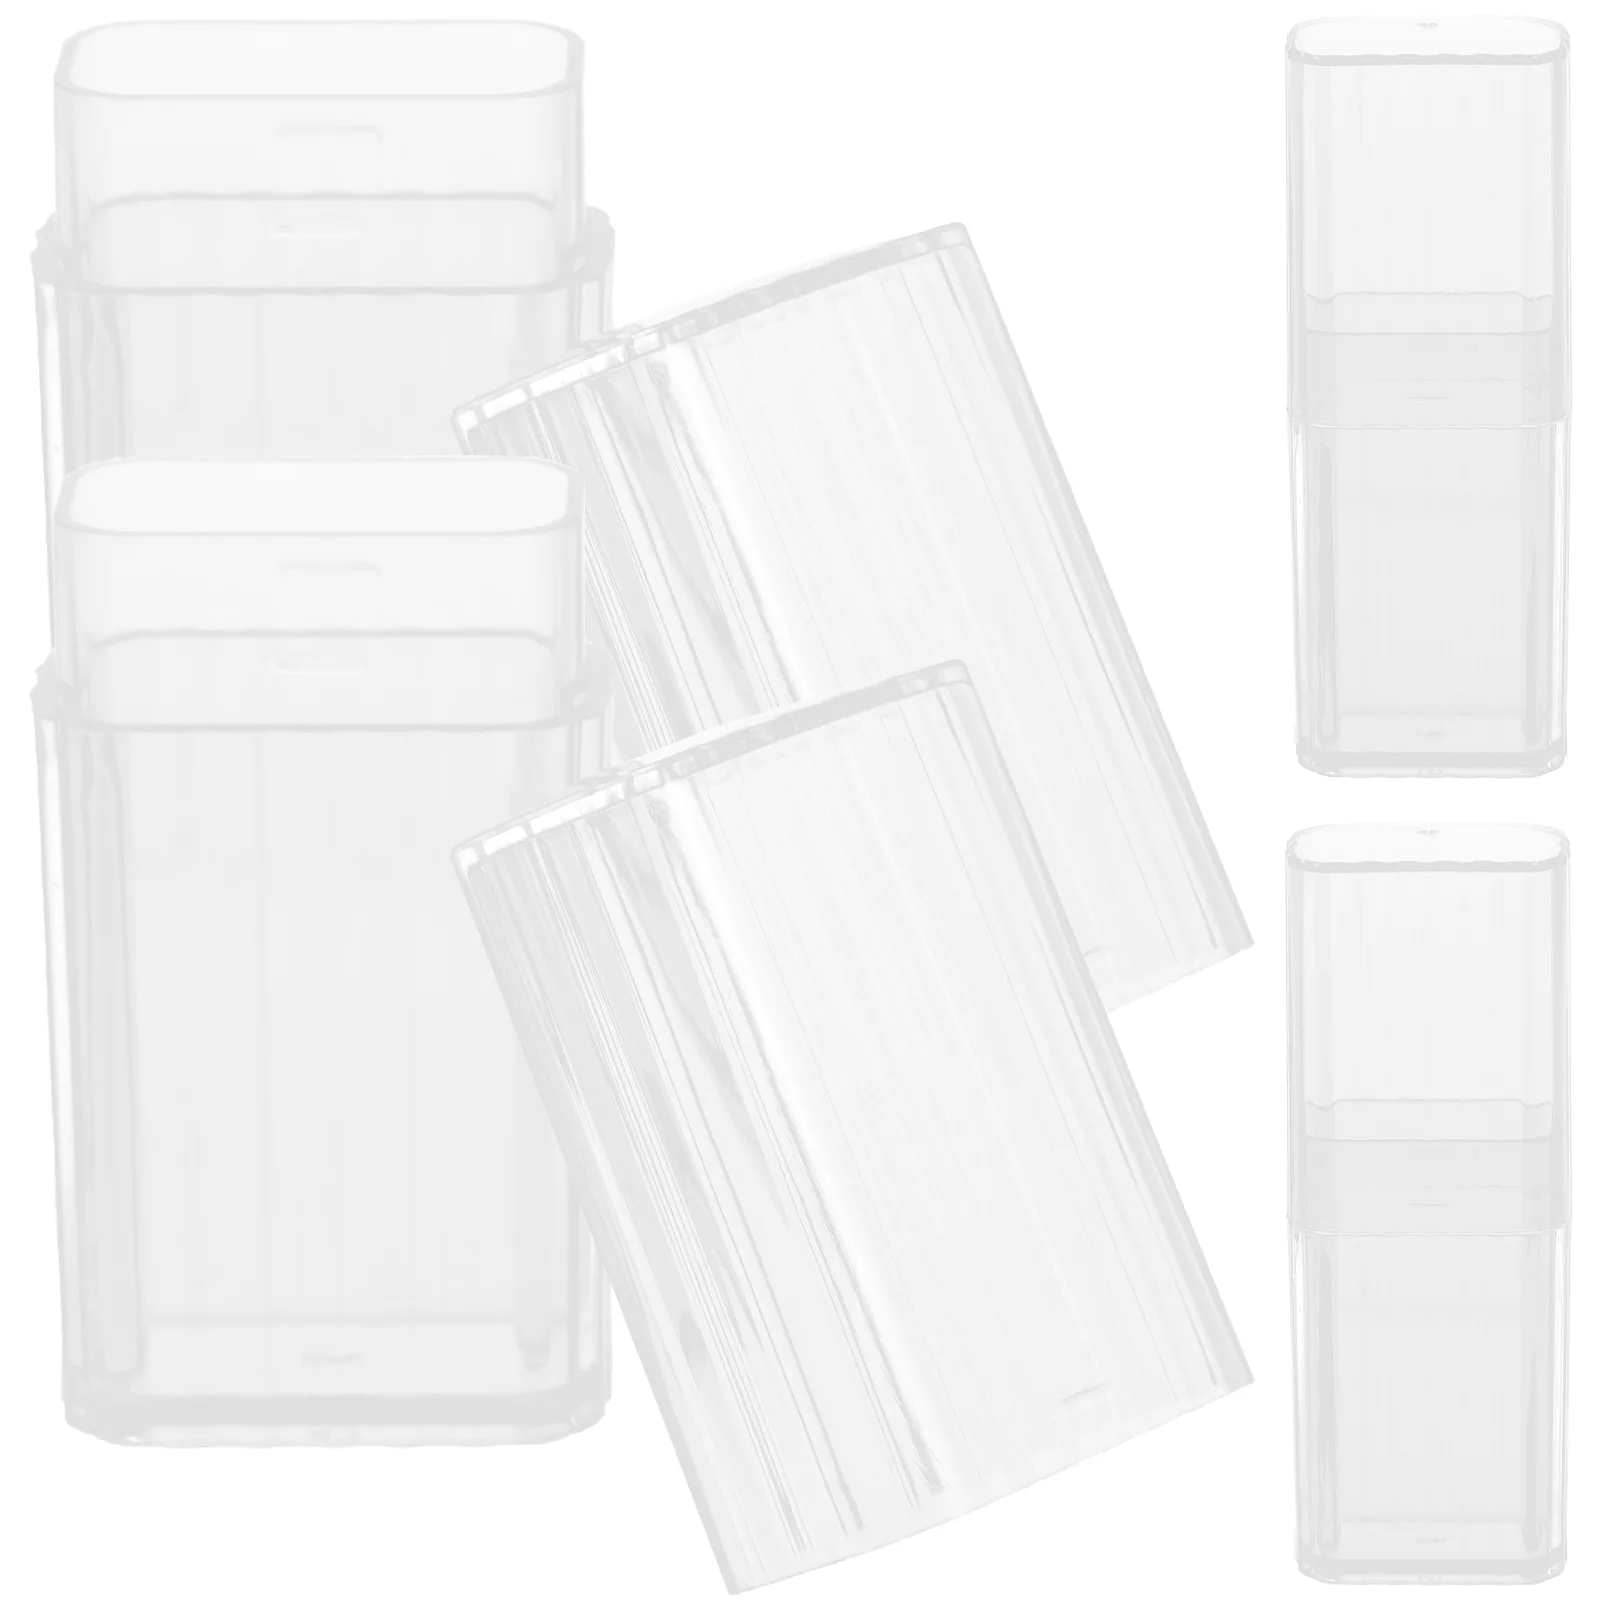 

Cotton Holder Bathroom Dispenser Qtip Container Organizer Toothpick Swabs Pads Floss Box Vanity Jar Canisters Bandage